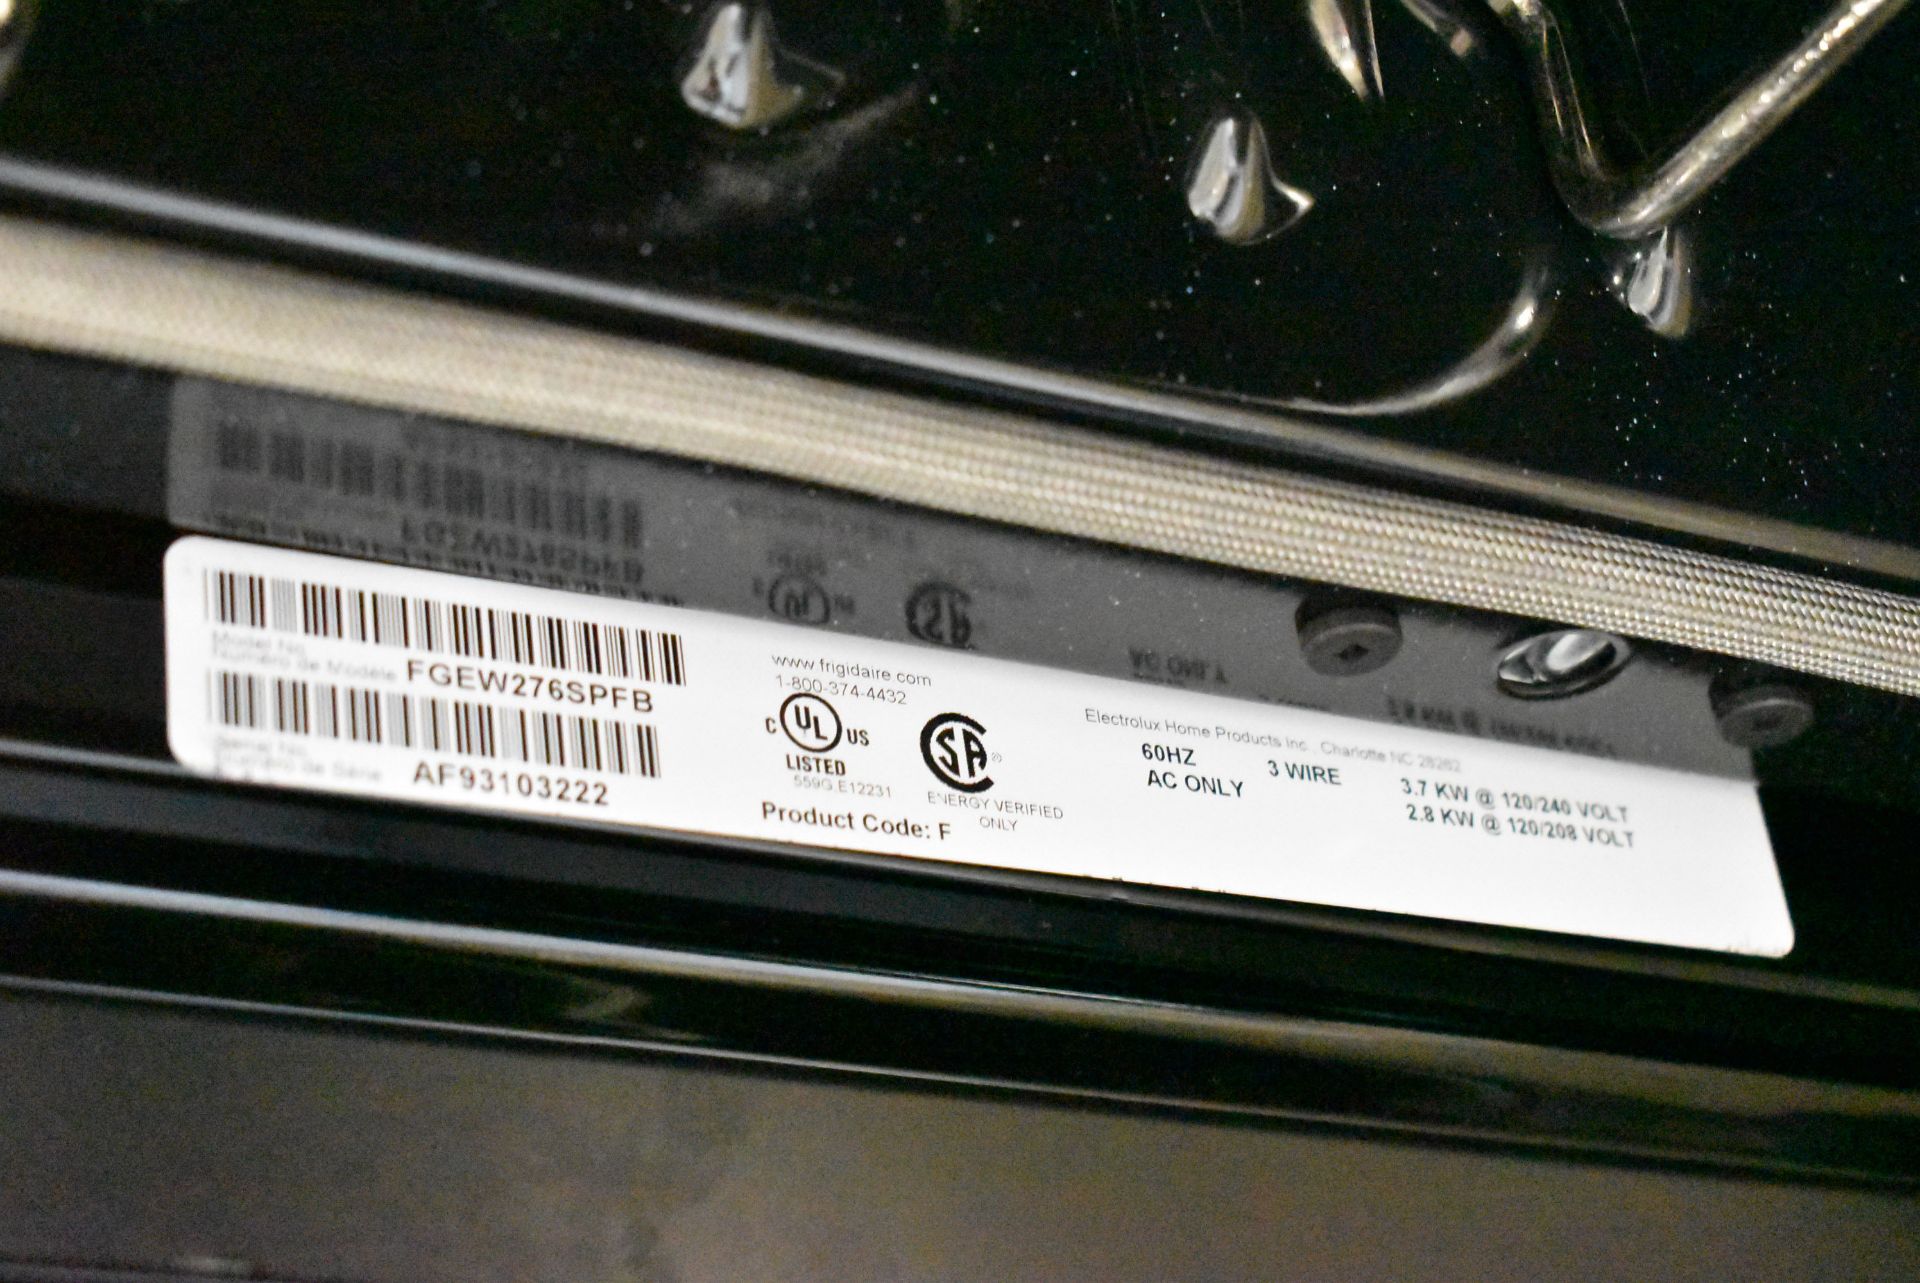 FRIGIDAIRE FGEW276SPFB GALLERY OVEN, S/N AF93103222 [RIGGING FEES FOR LOT #143 - $25 CAD PLUS - Image 3 of 6